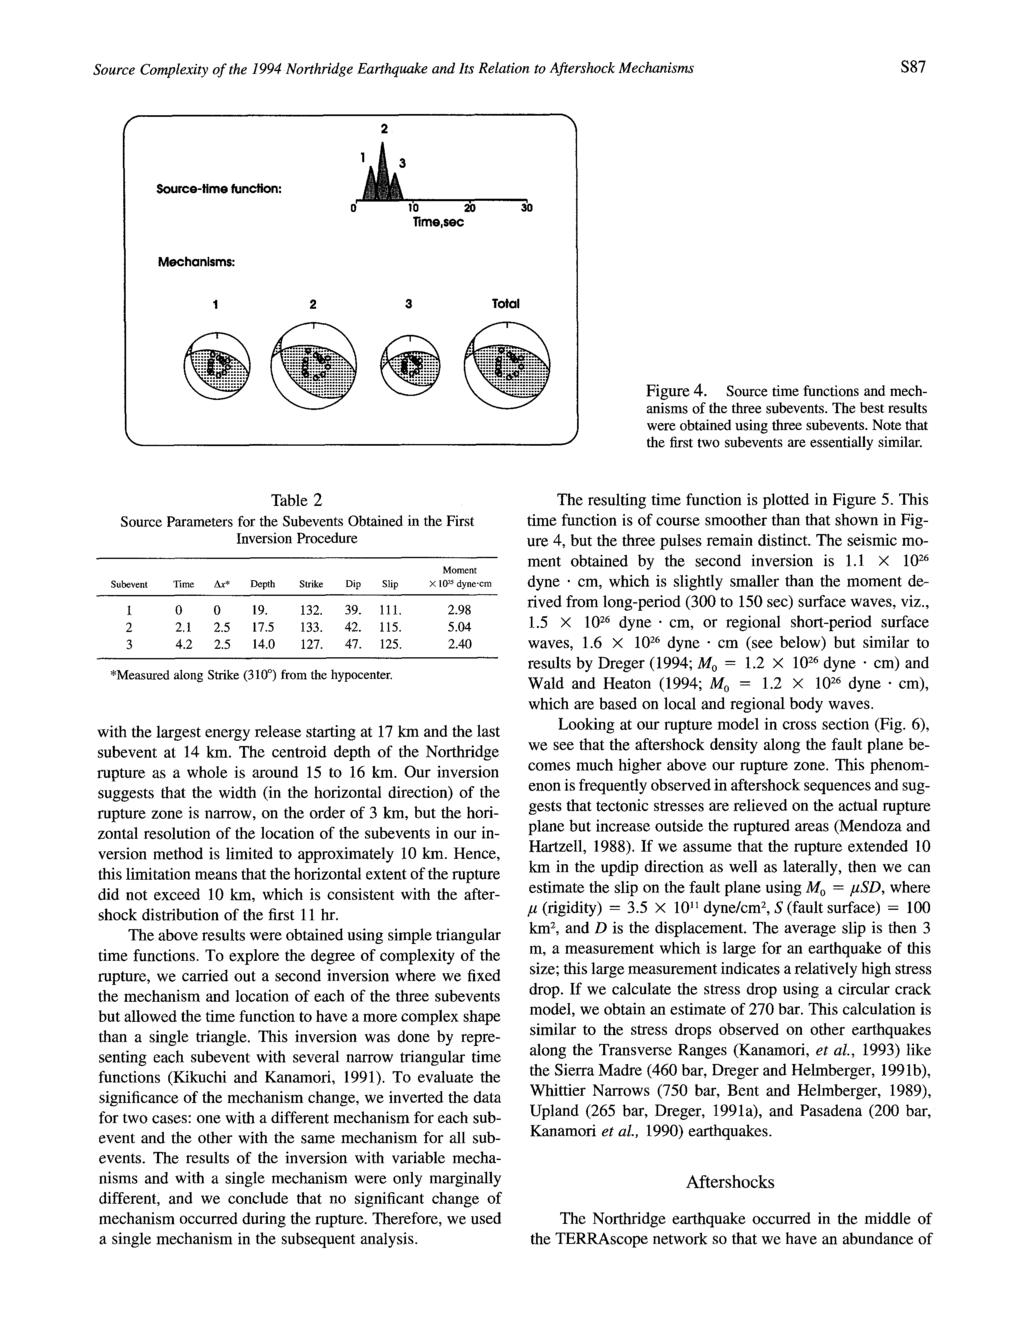 Source Complexity of the 1994 Northridge Earthquake and Its Relation to Afiershock Mechanisms $87 2 Source-time function: o' 1"0 ~o 11rne,sec 3o Mechanisms: I 2 3 Total Figure 4.